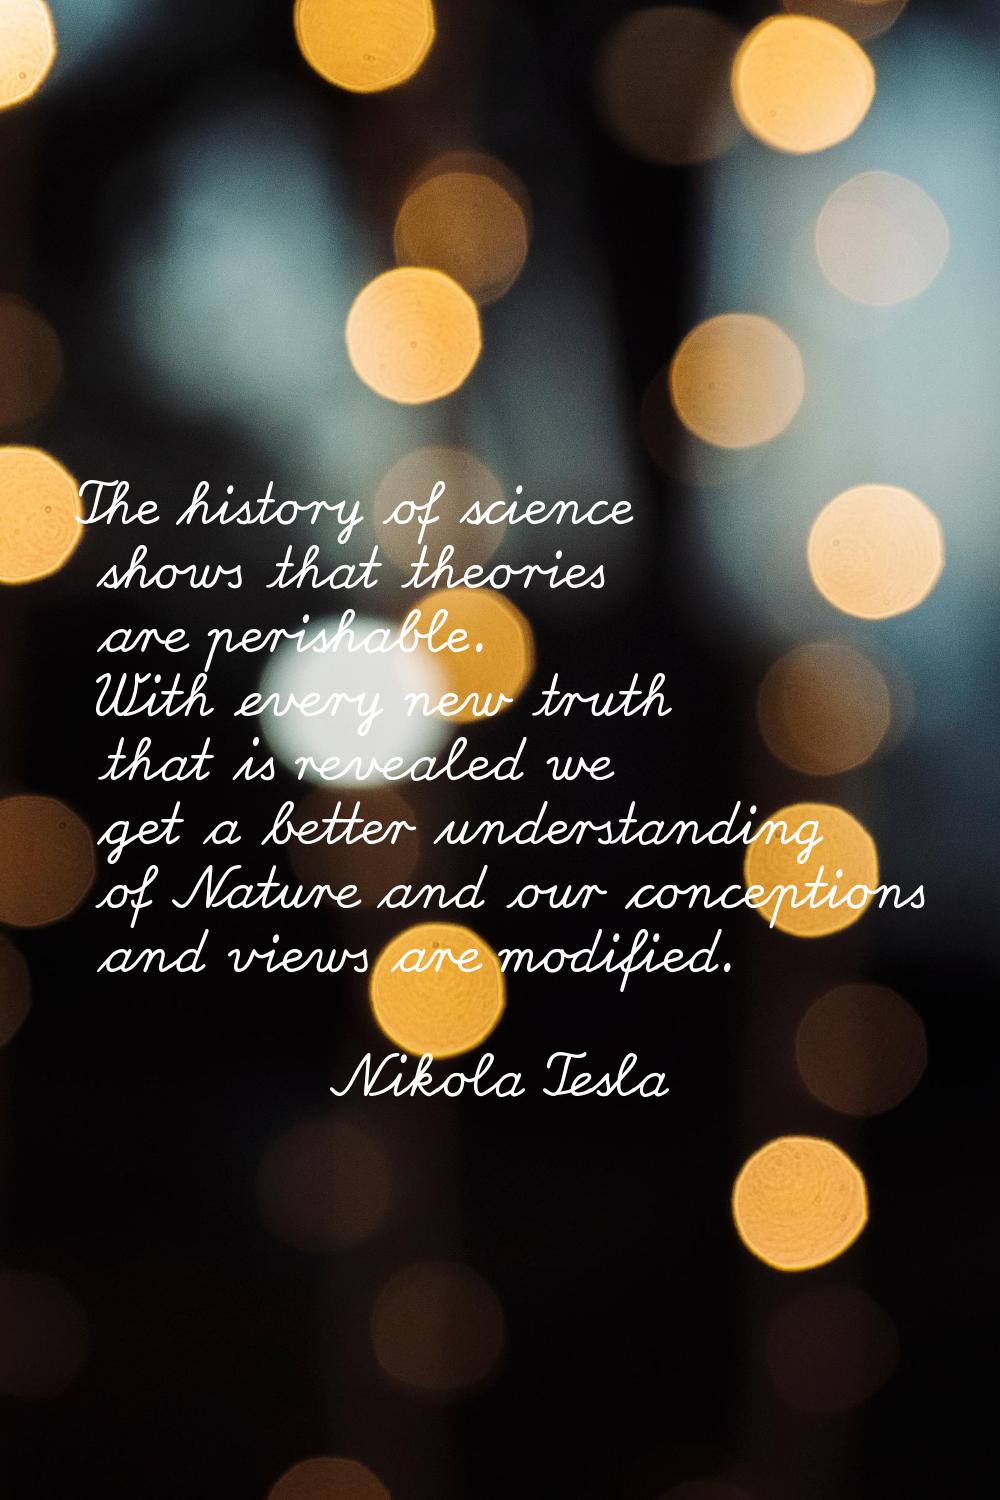 The history of science shows that theories are perishable. With every new truth that is revealed we